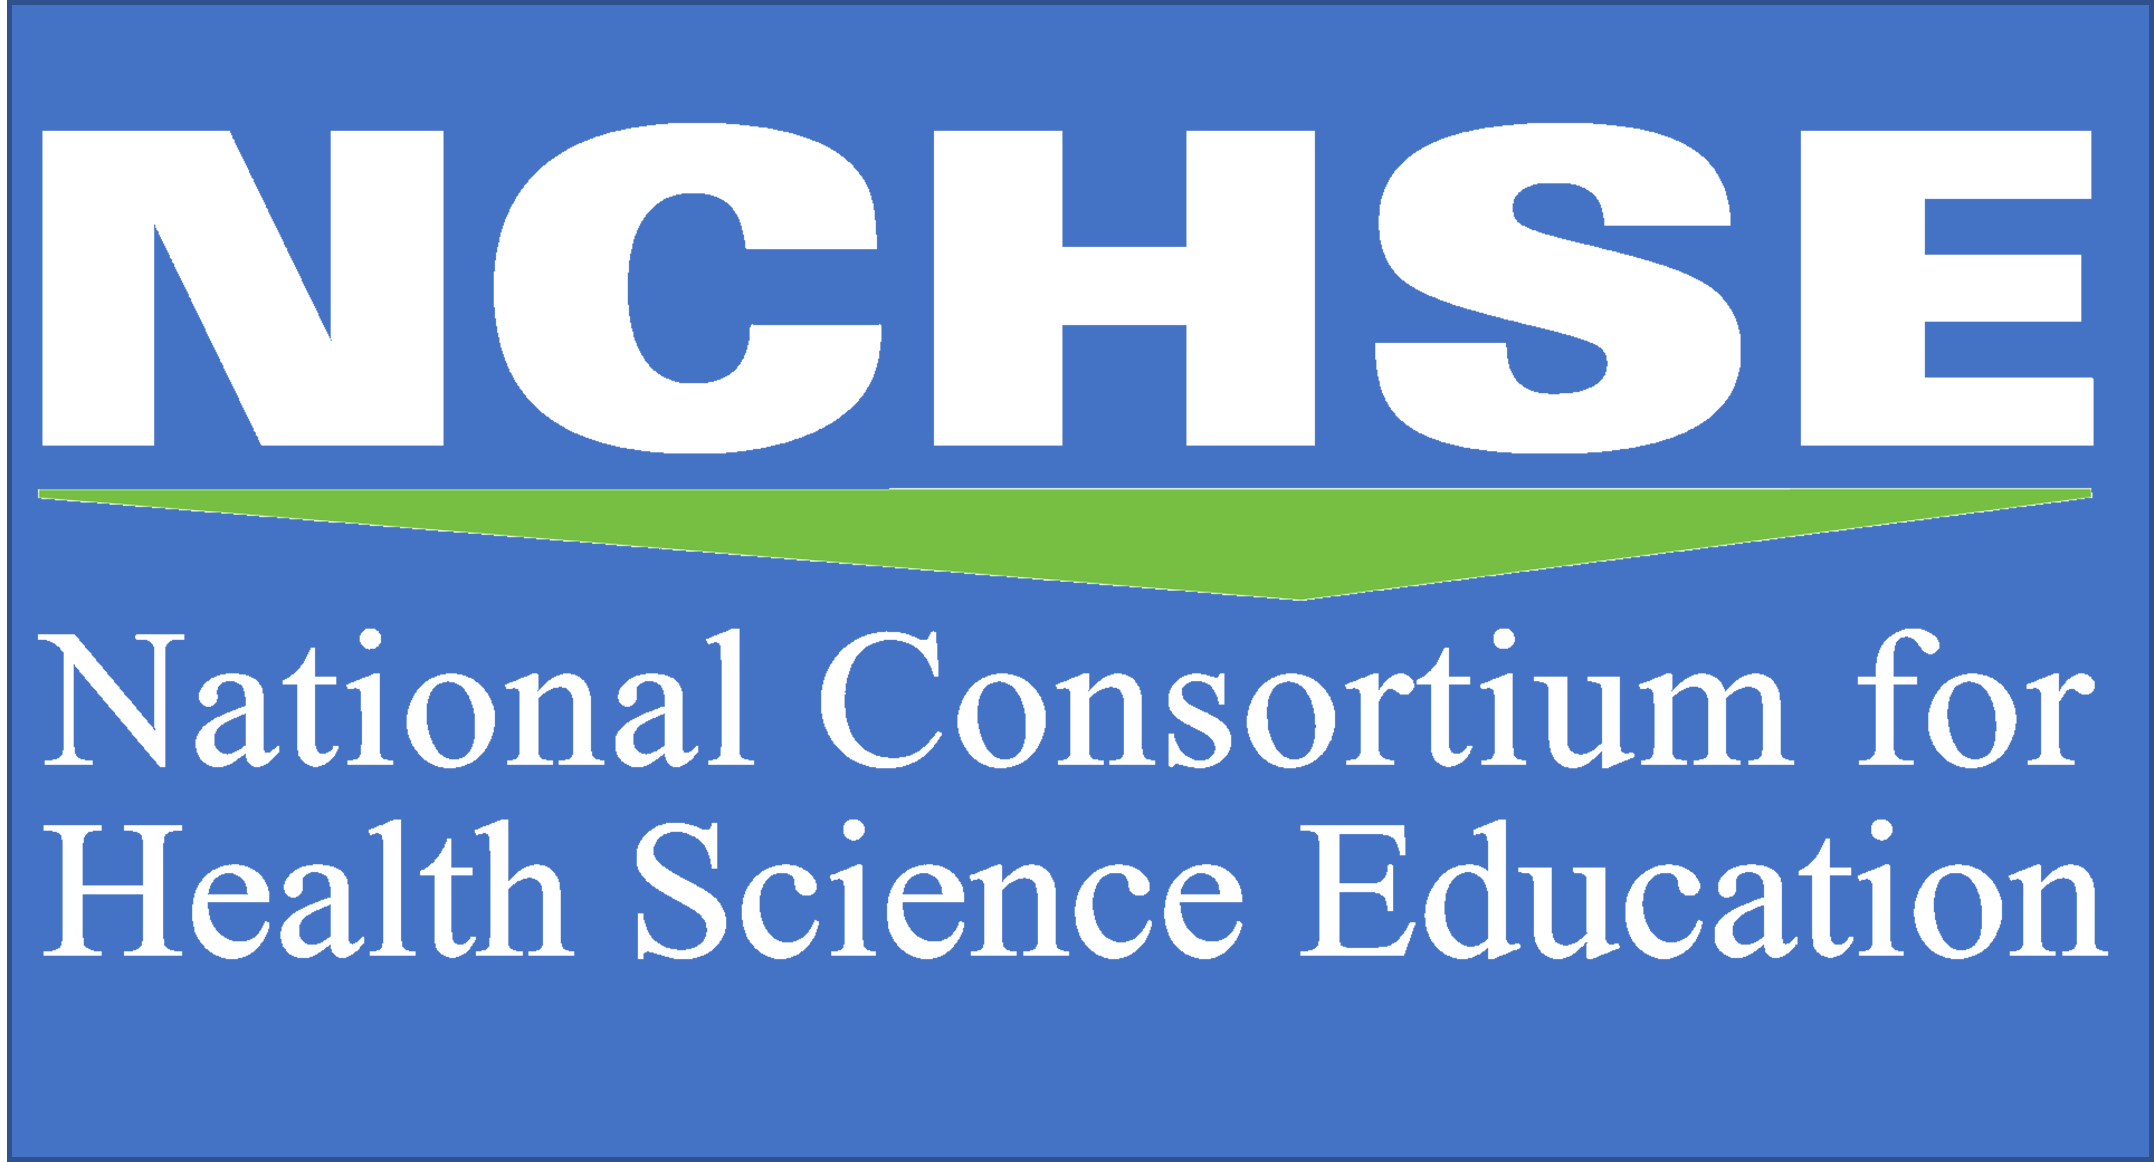 National Council for Health Science Education (NCHSE) logo